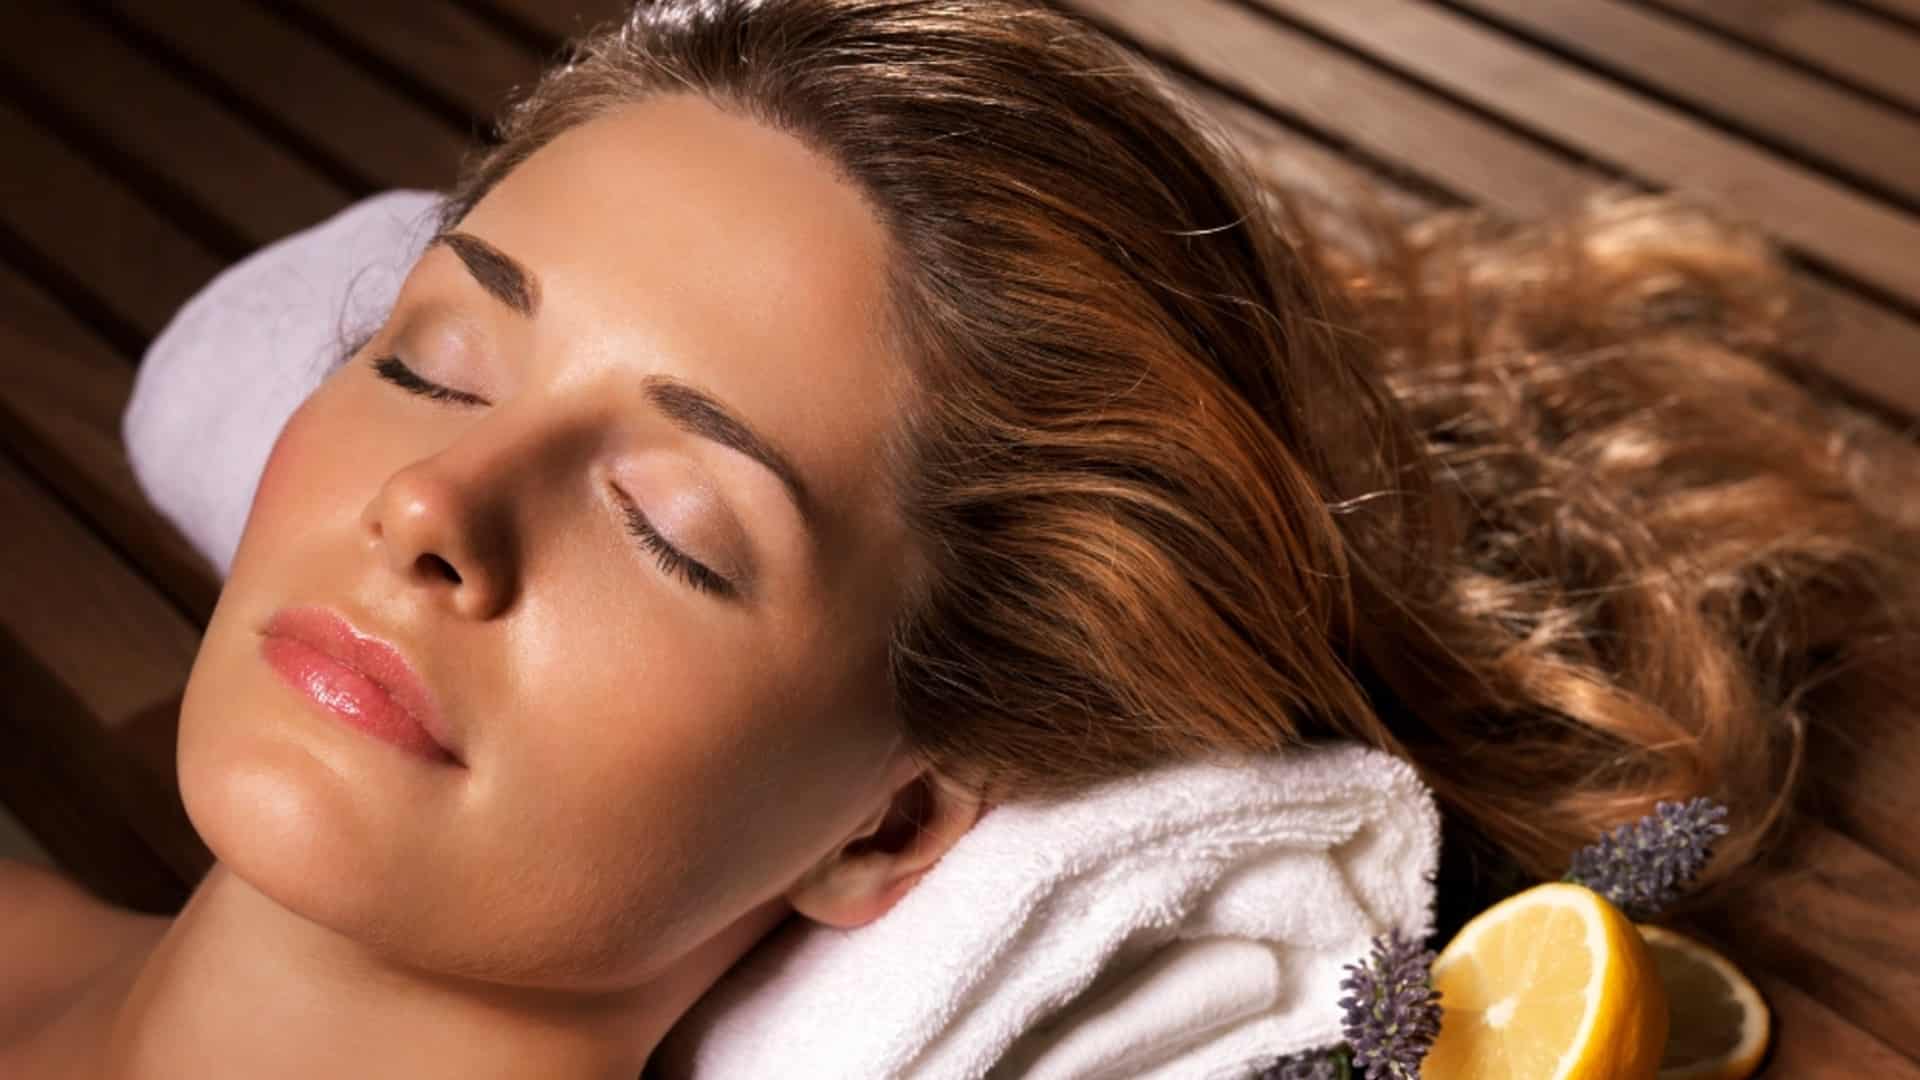 Improve your mental health with a sauna, like this woman laying down with her eyes closed and head on a towel.